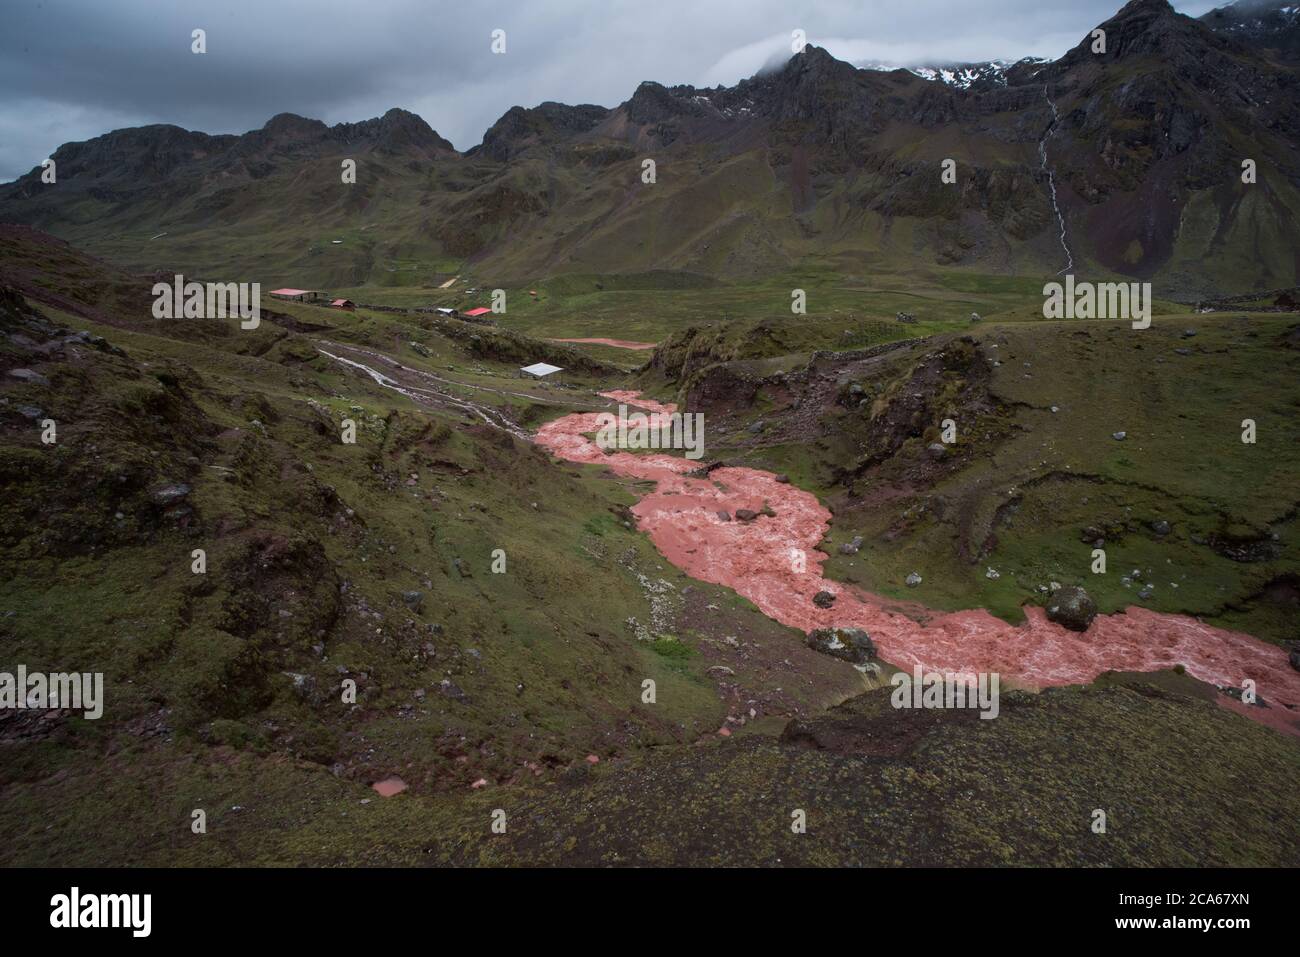 Hasty construction of the road to rainbow mountain in Peru leads to formerly clean rivers choked with sediment and runoff from erosion. Stock Photo